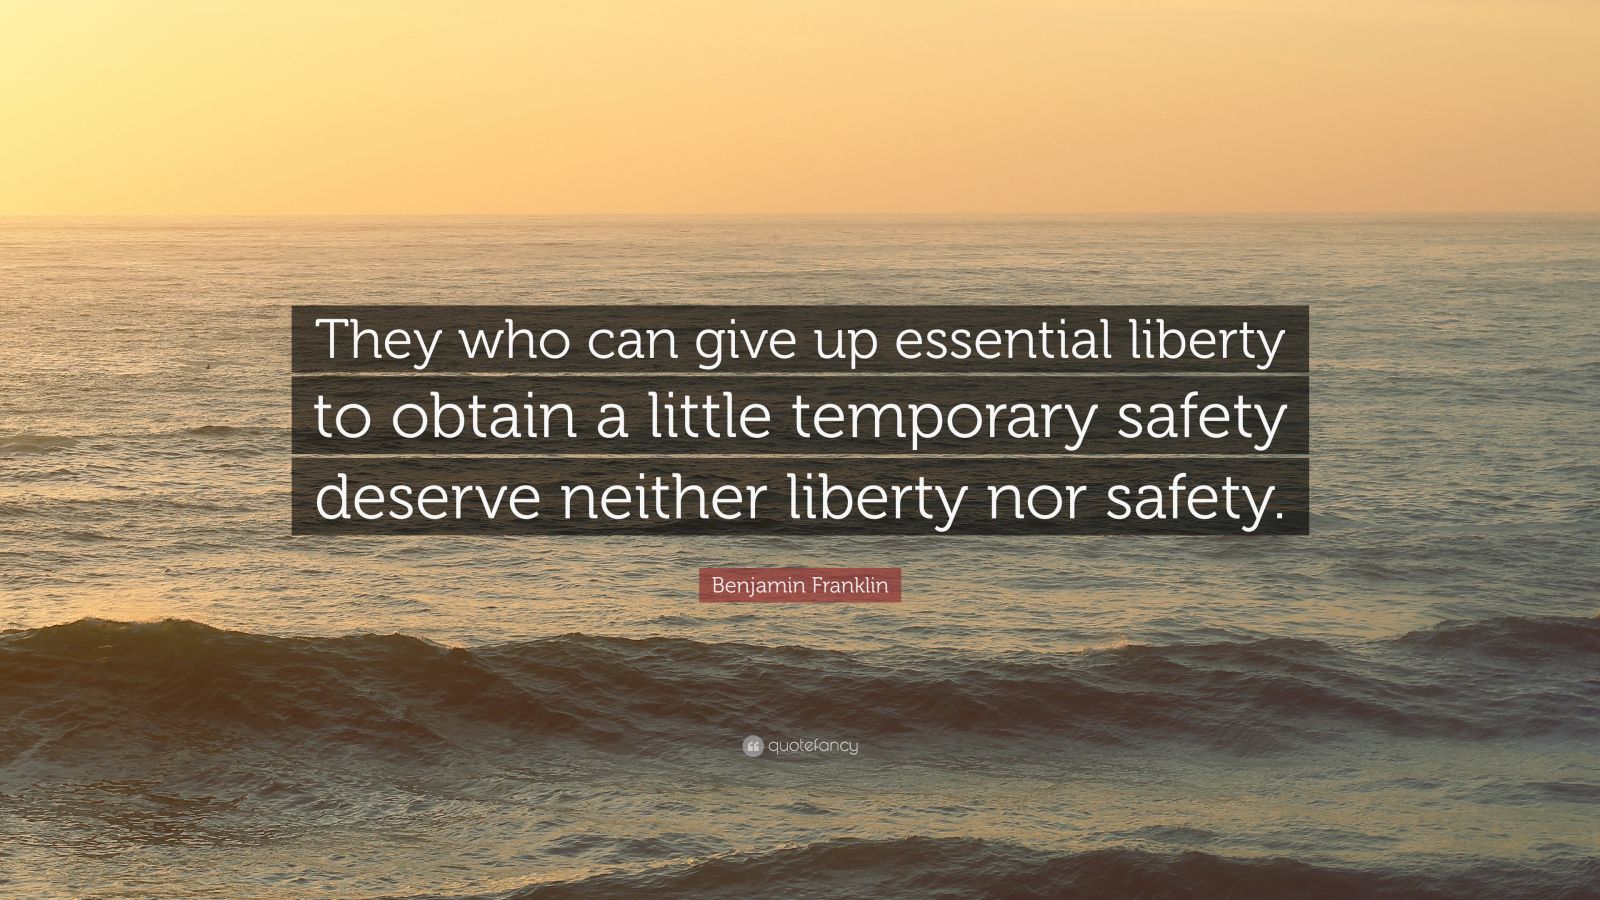 those who give up liberty